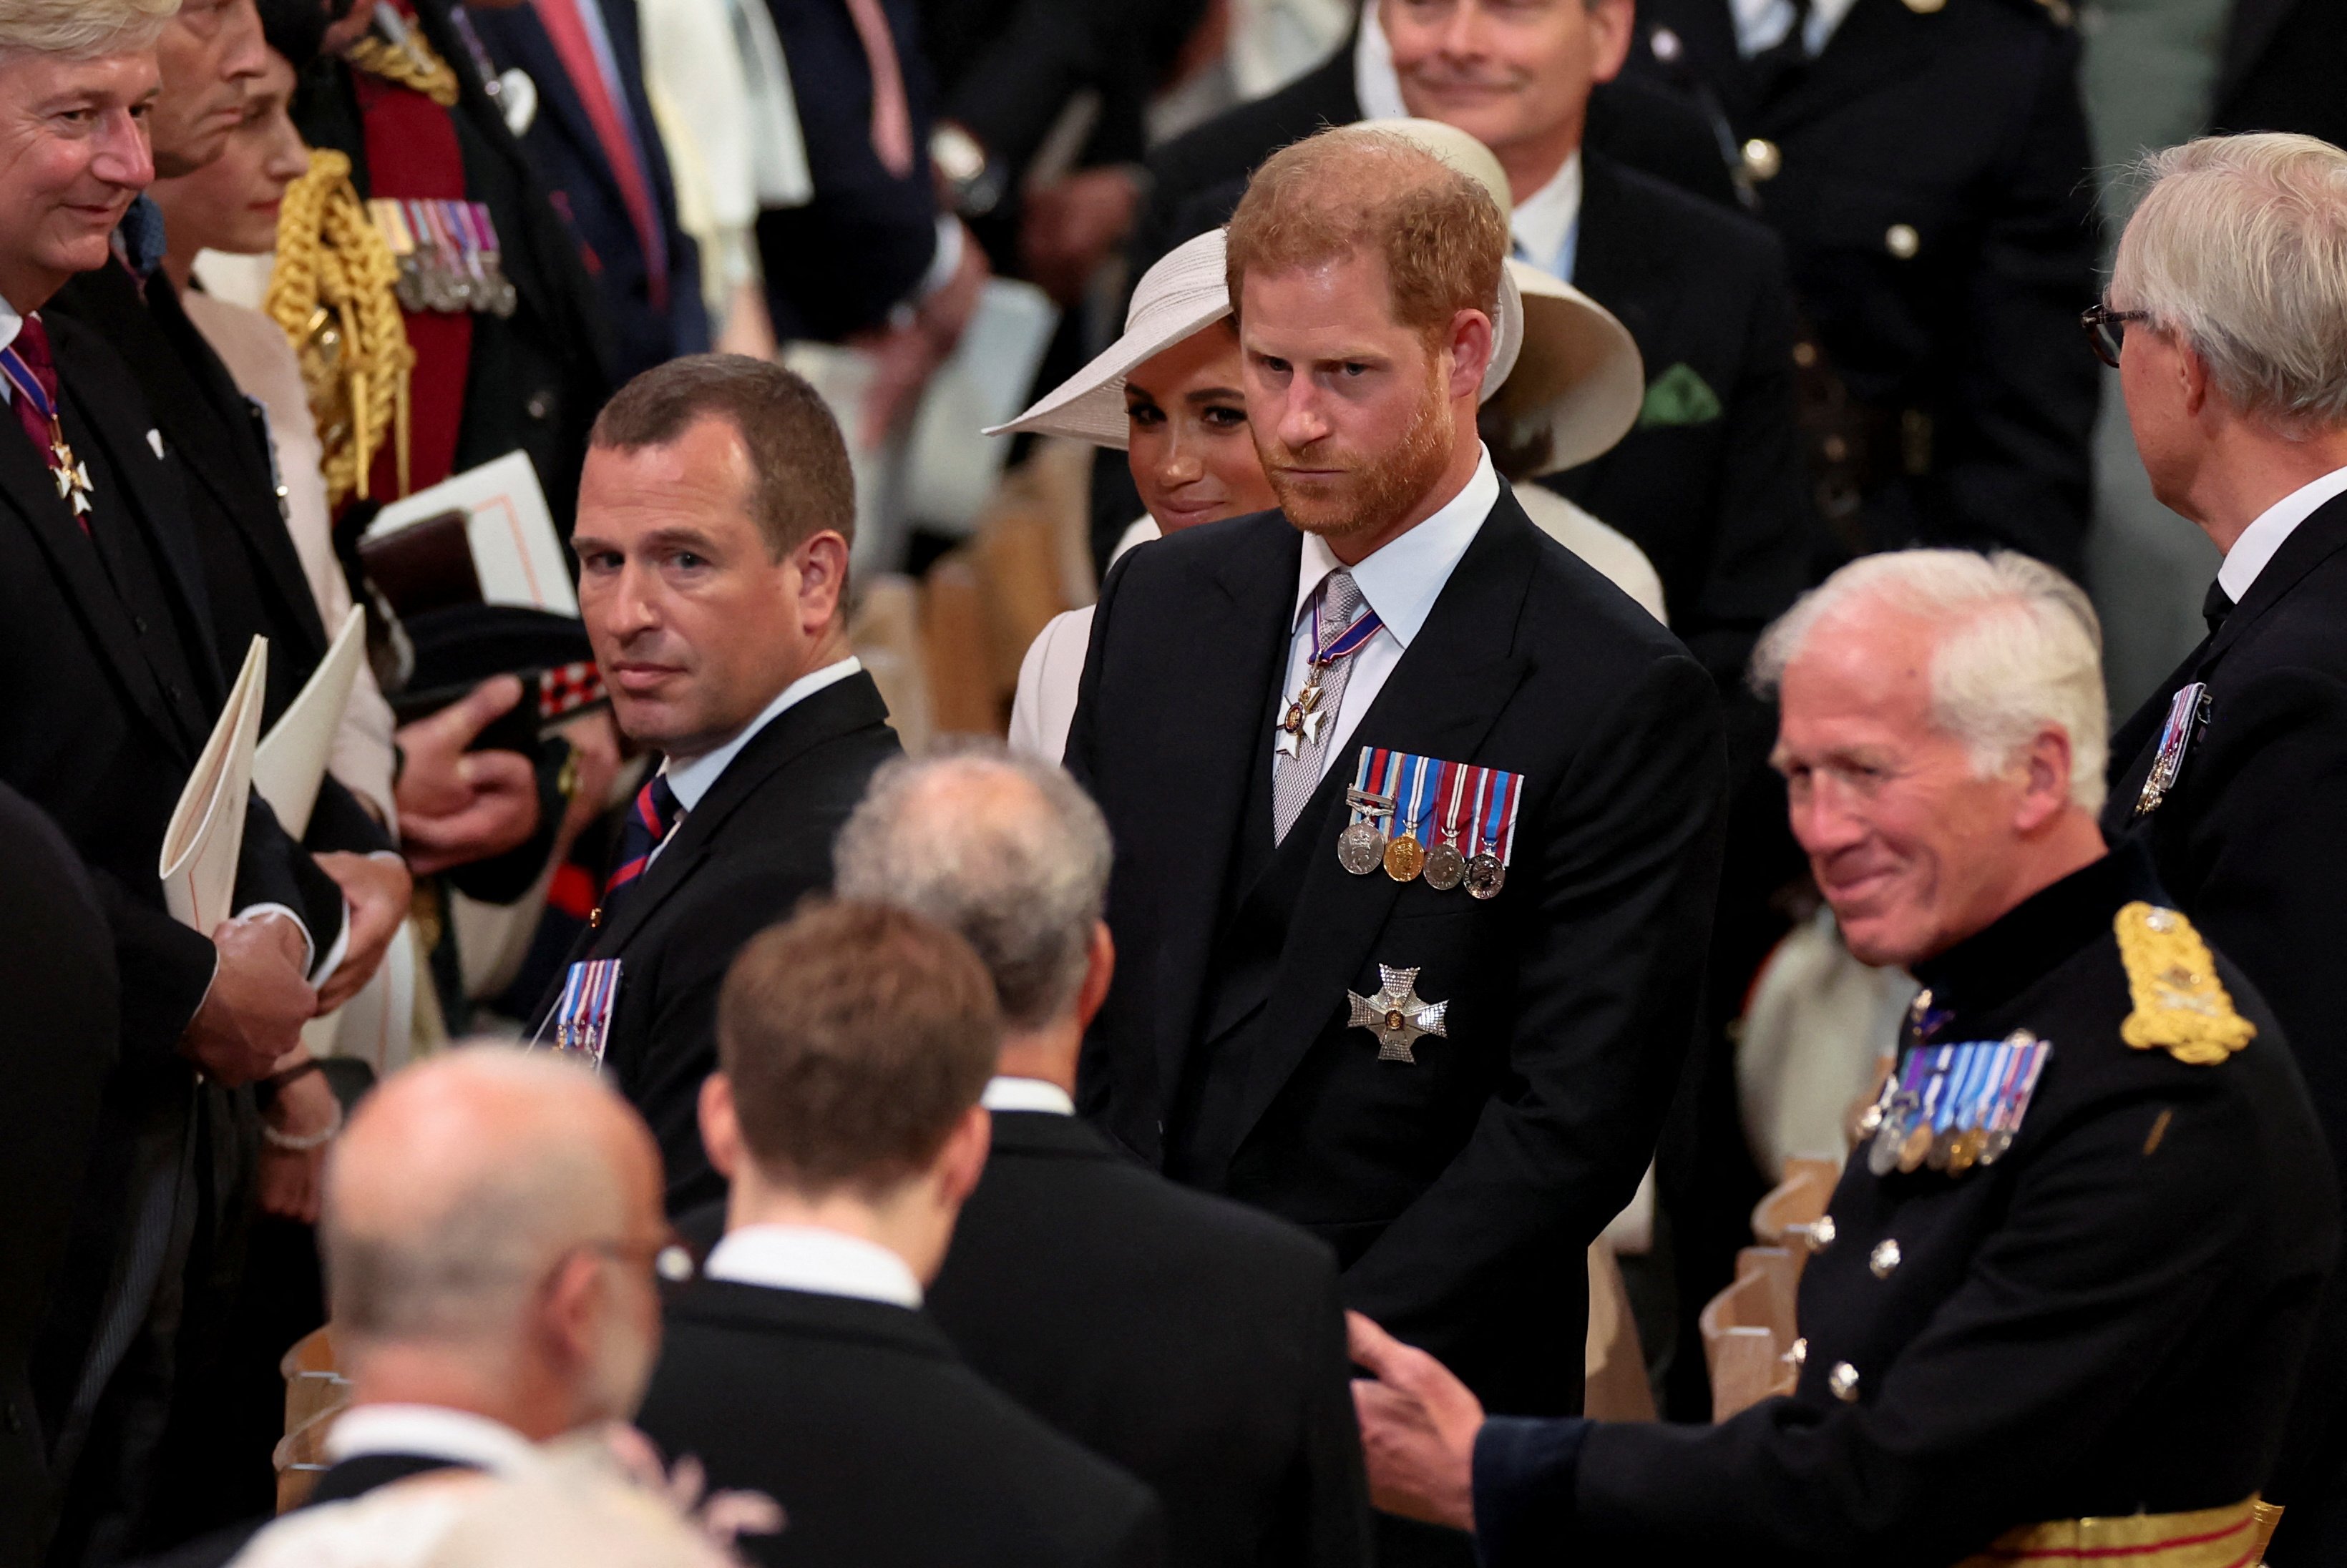 Prince Harry and Duchess Meghan after the National Service of Thanksgiving to celebrate the Platinum Jubilee of the Queen at St Paul's Cathedral on June 3, 2022, in London, England. | Source: Getty Images